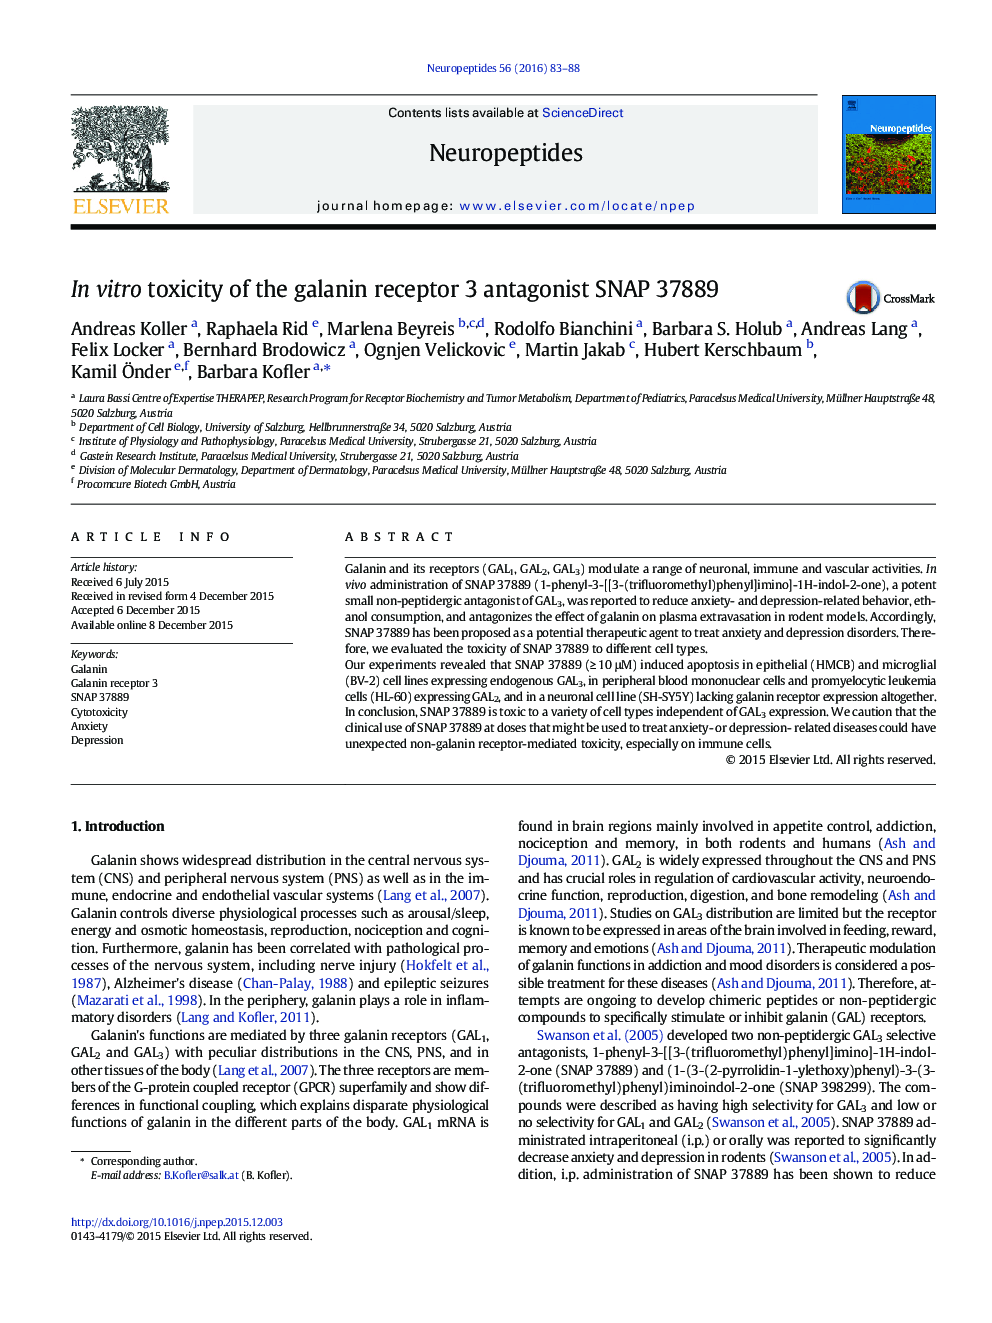 In vitro toxicity of the galanin receptor 3 antagonist SNAP 37889